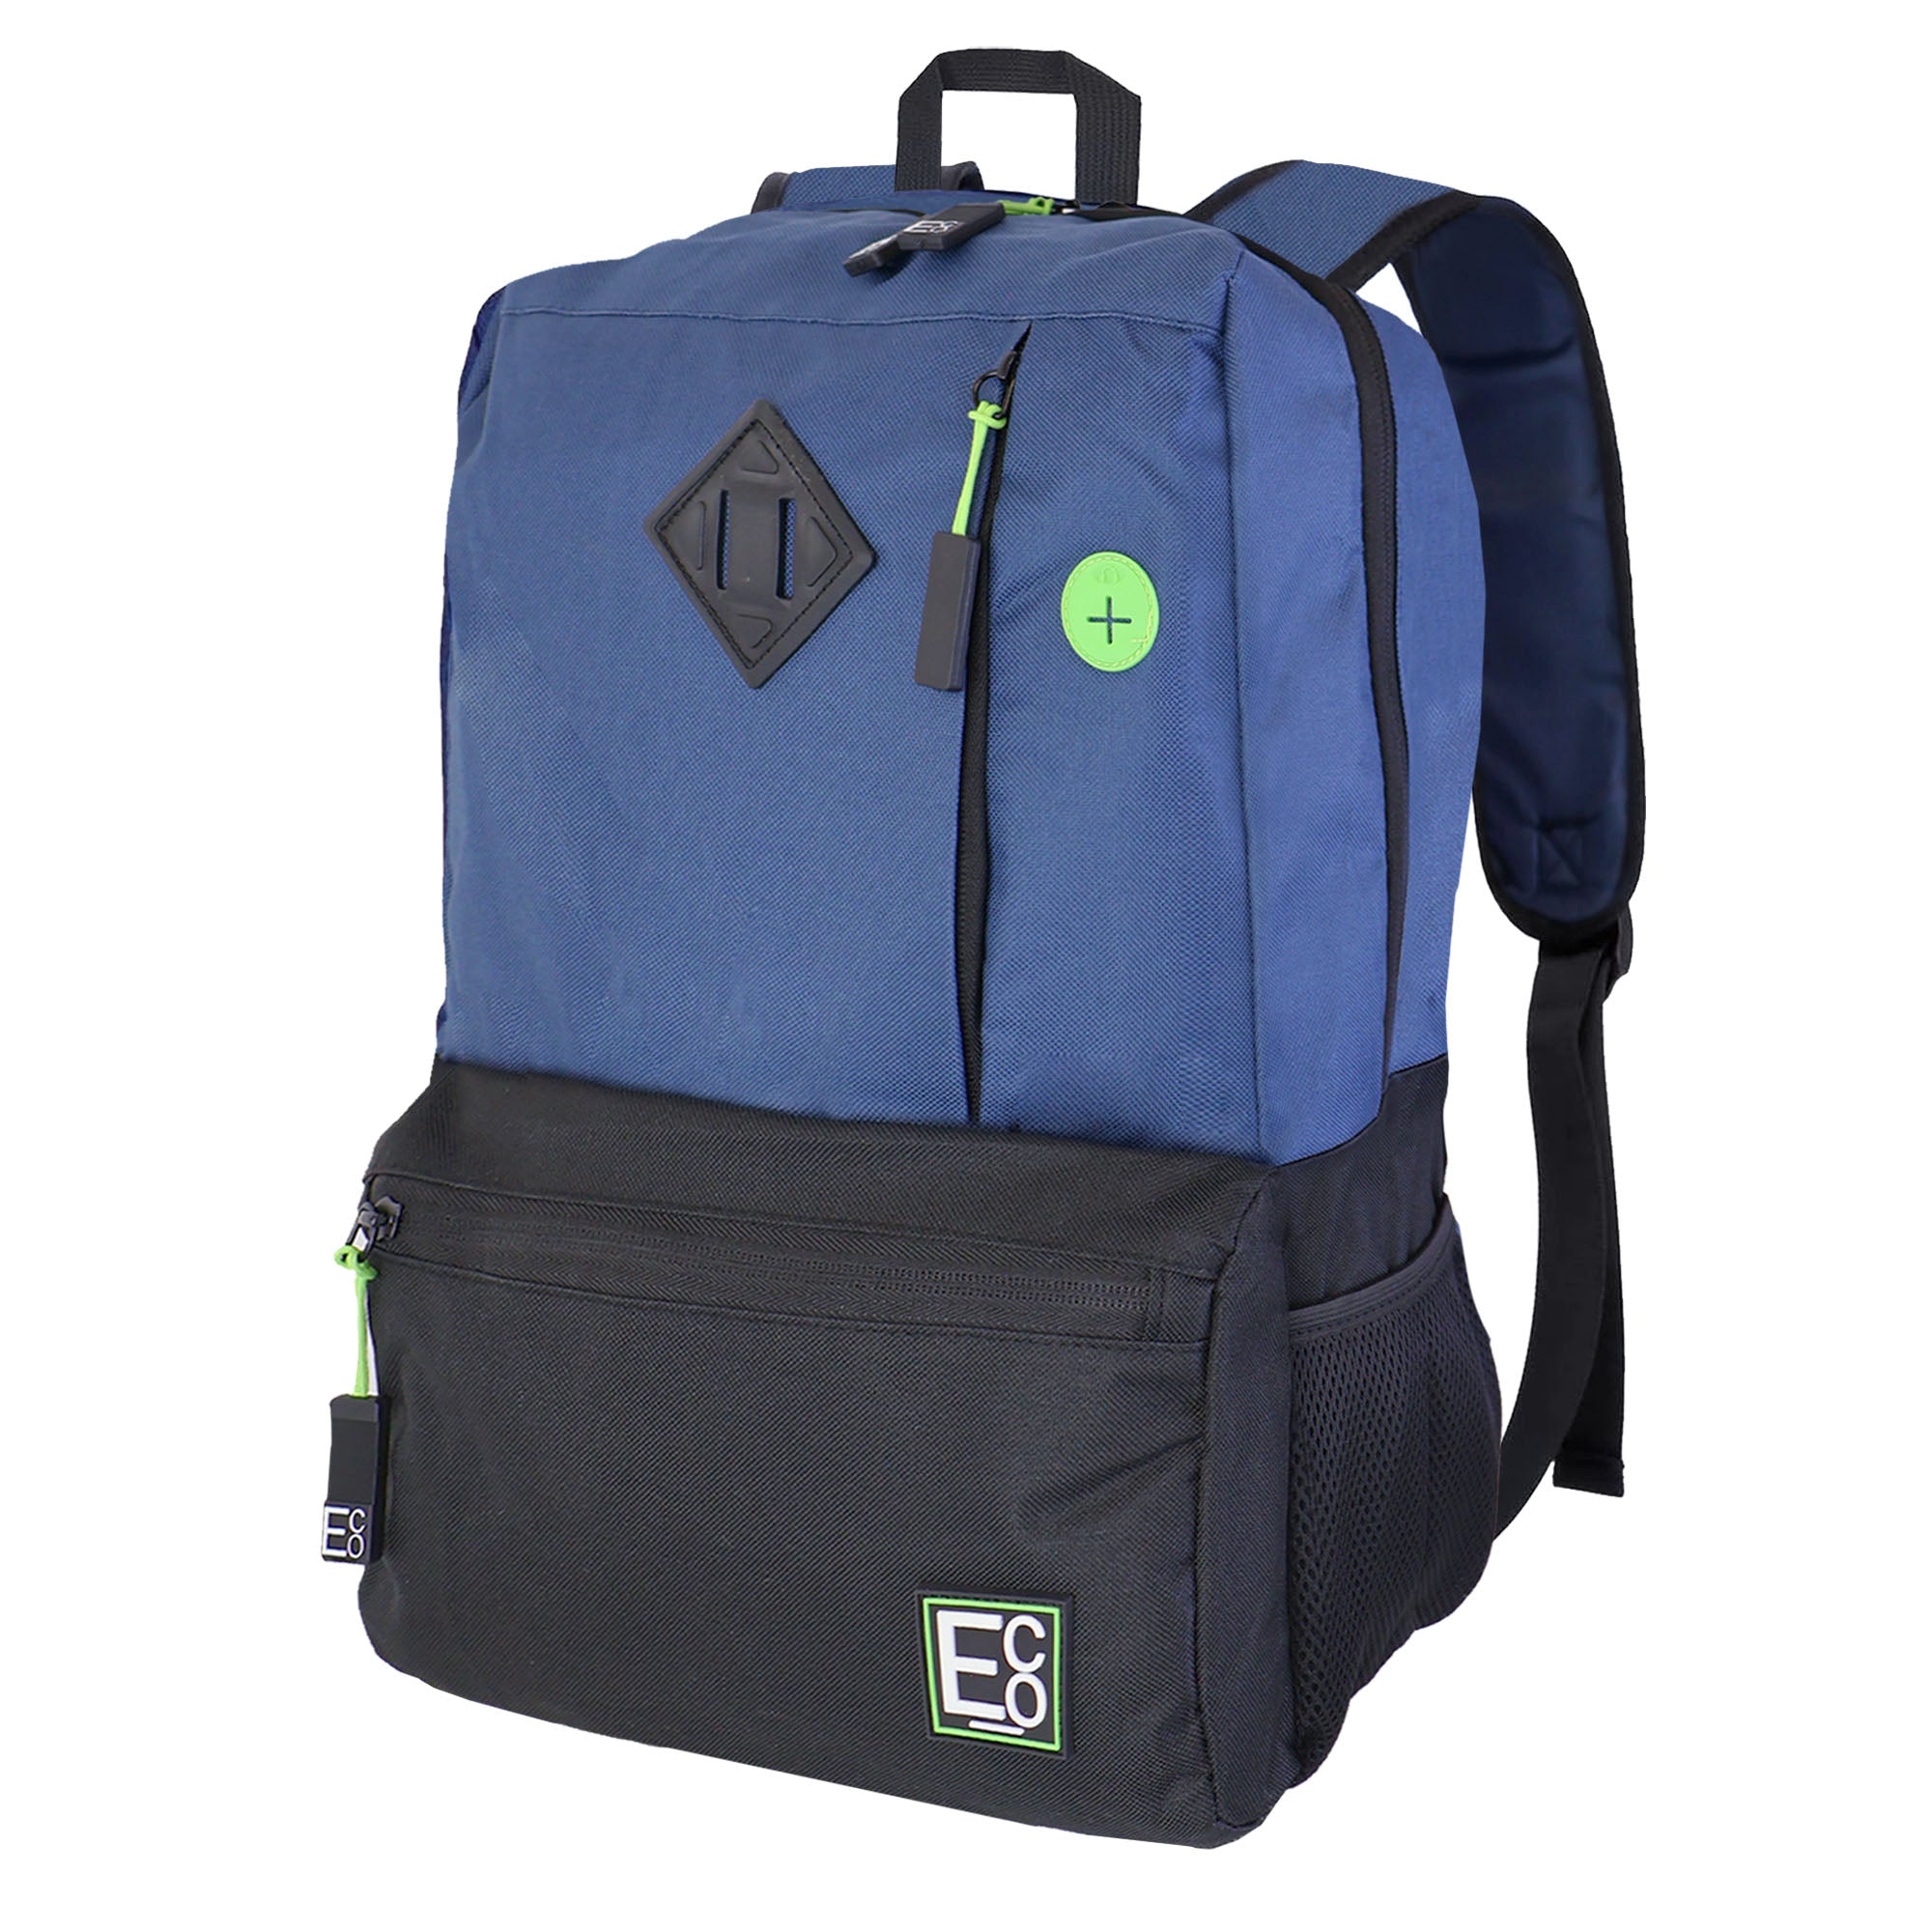 Laptop Student Backpack - Navy